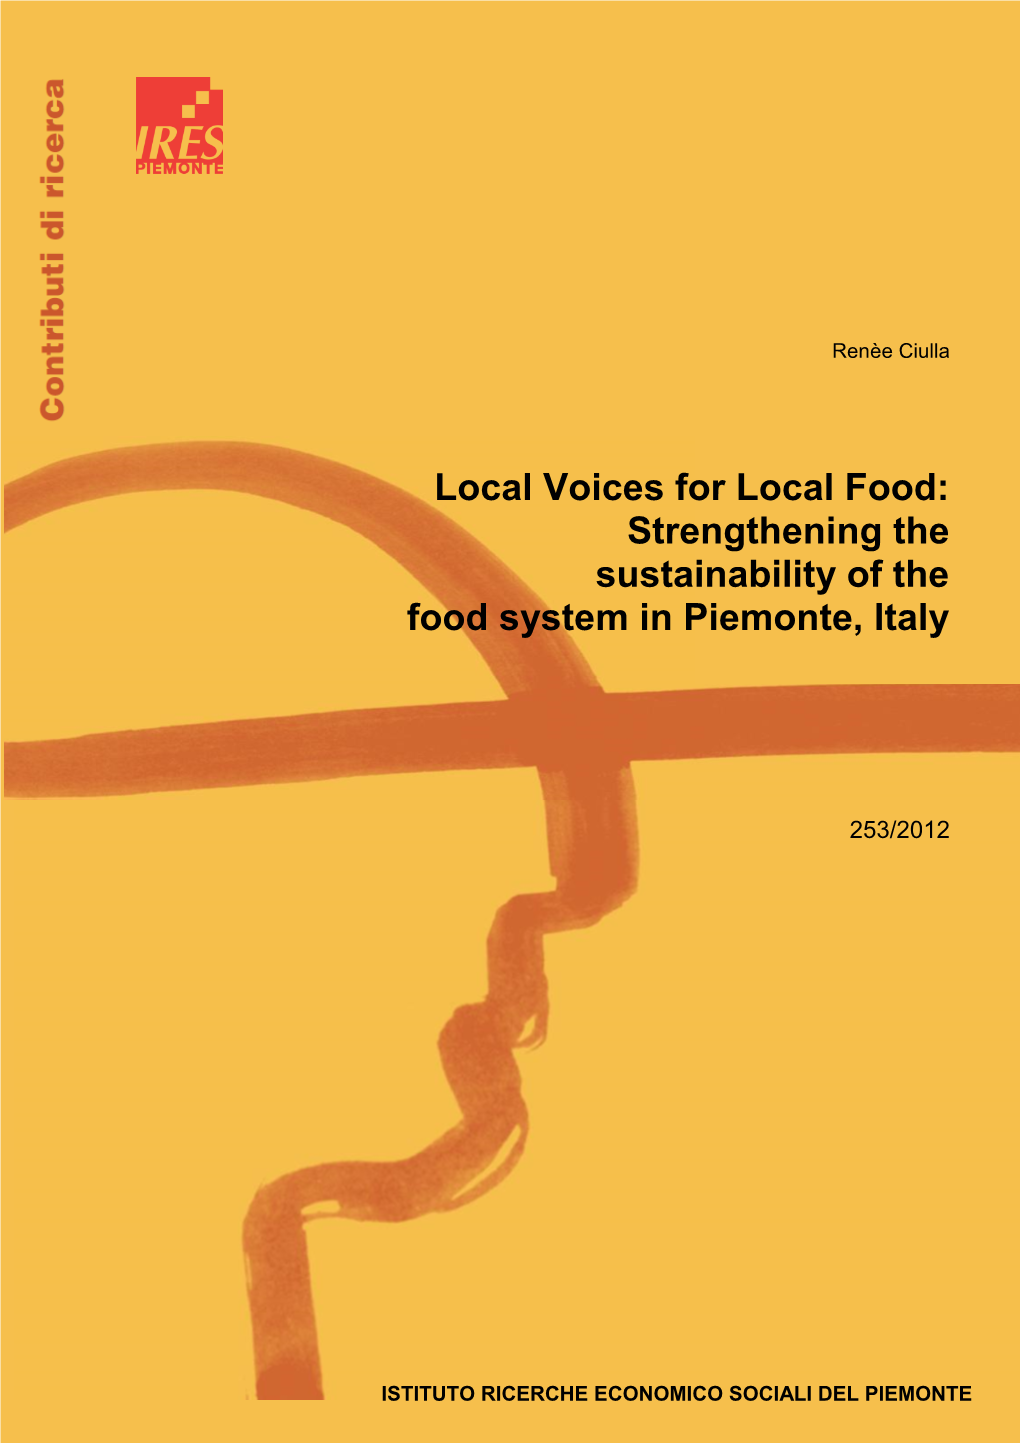 Strengthening the Sustainability of the Food System in Piemonte, Italy